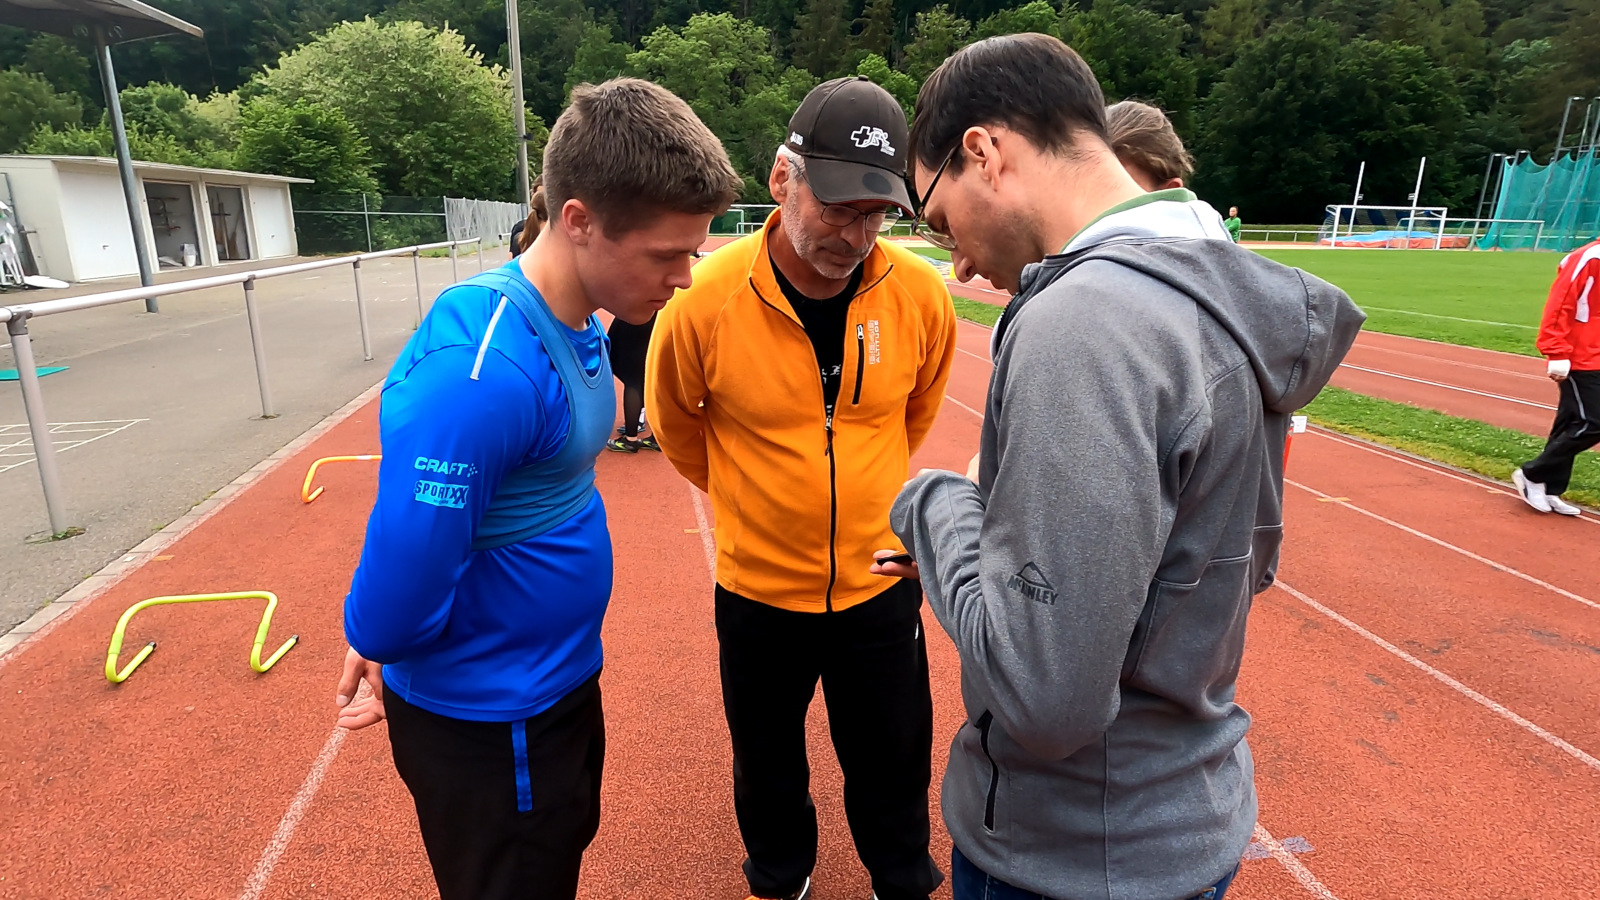 Picture giving performance feedback to athlete and coach